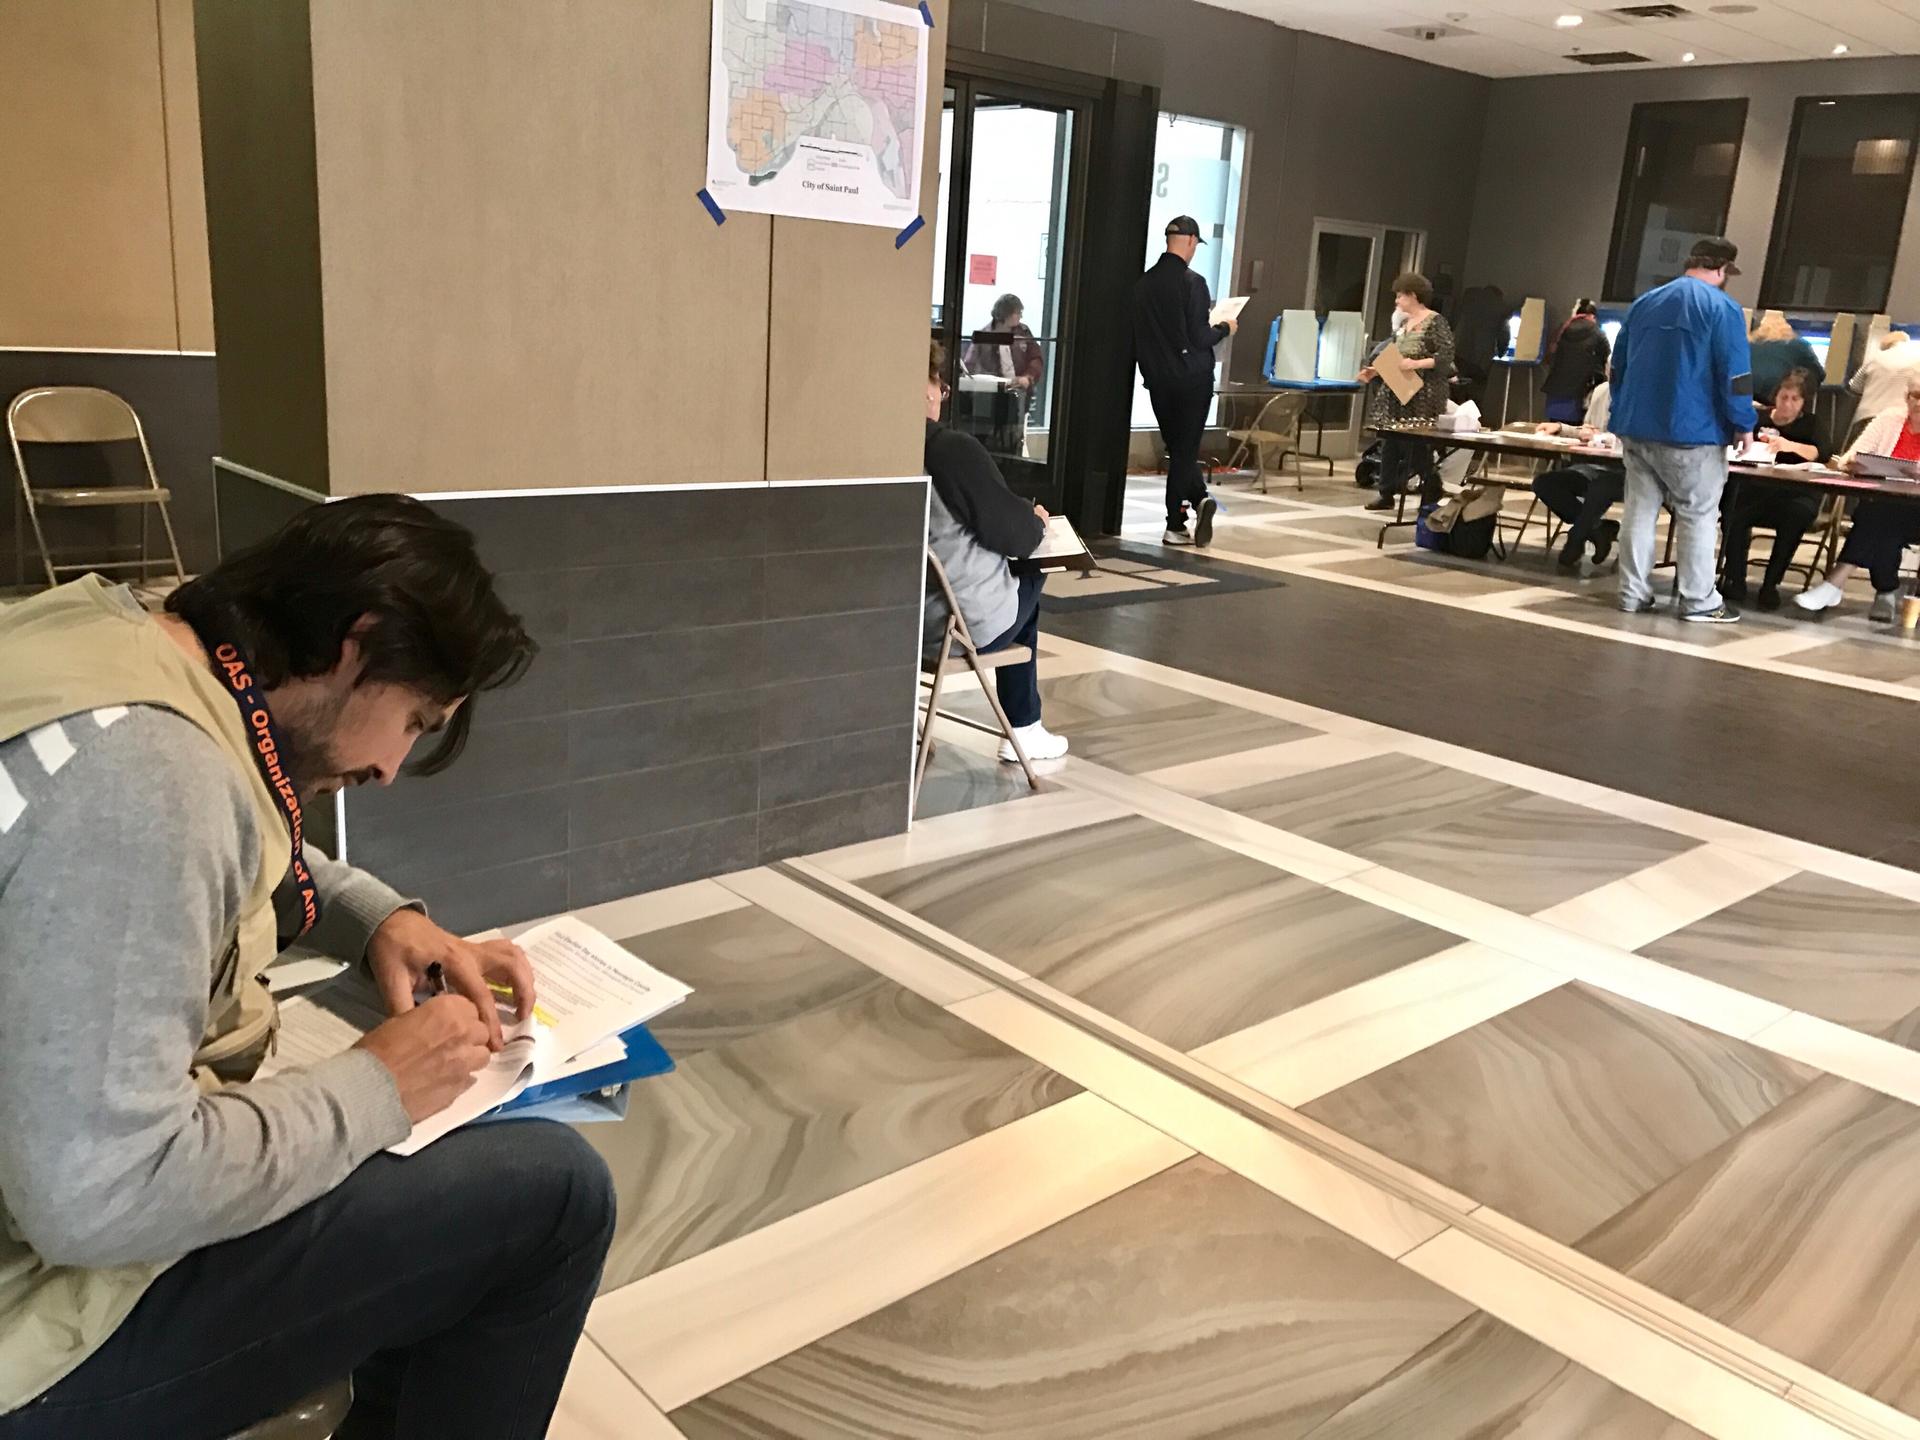 Man sits in polling place with binder